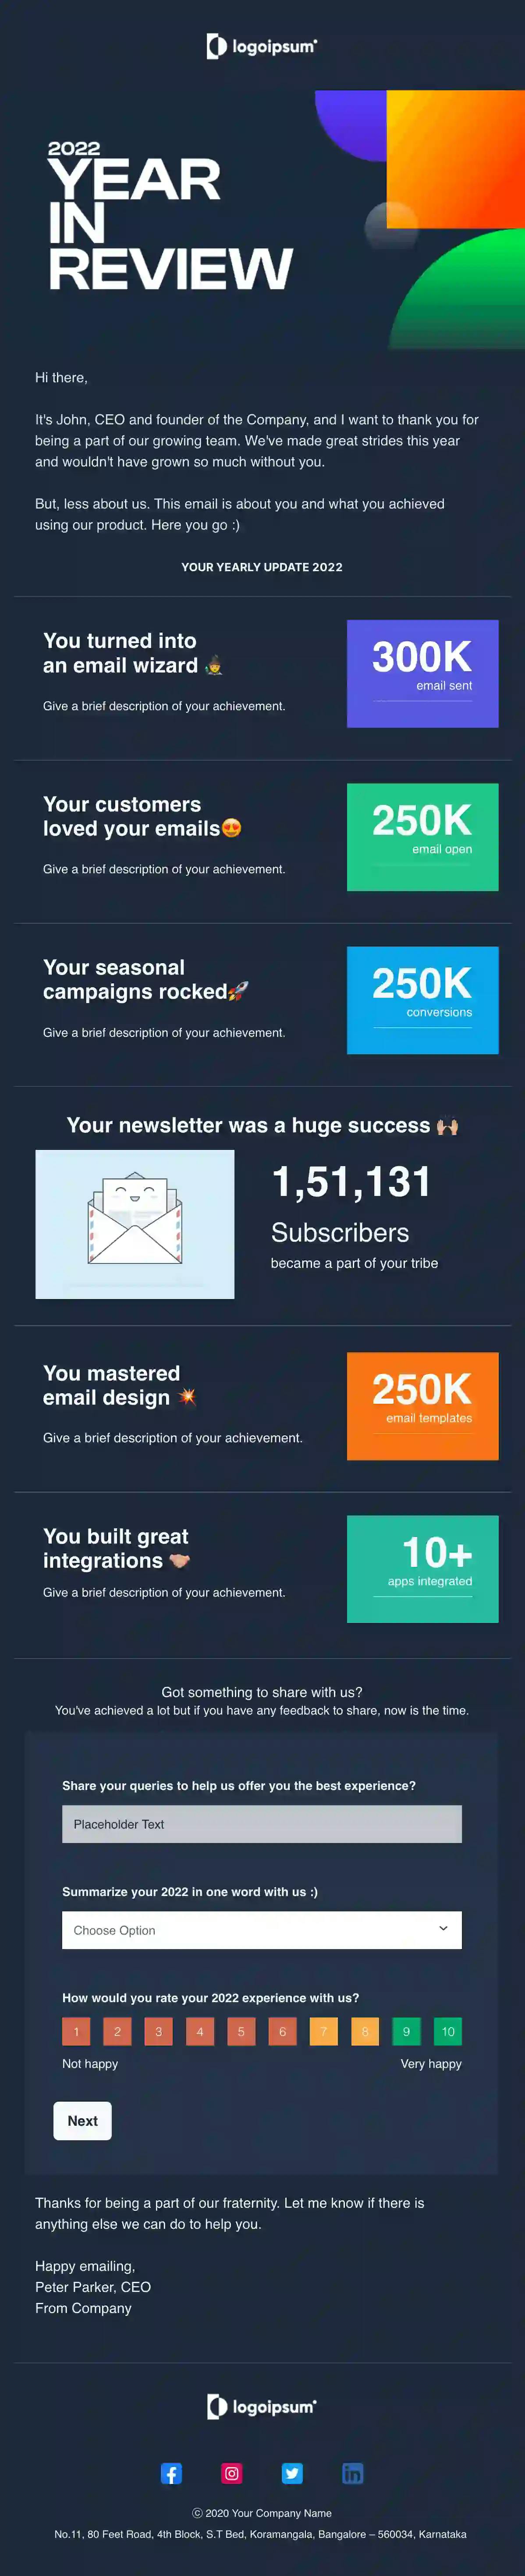 Free Year In-Review Dark Email Template